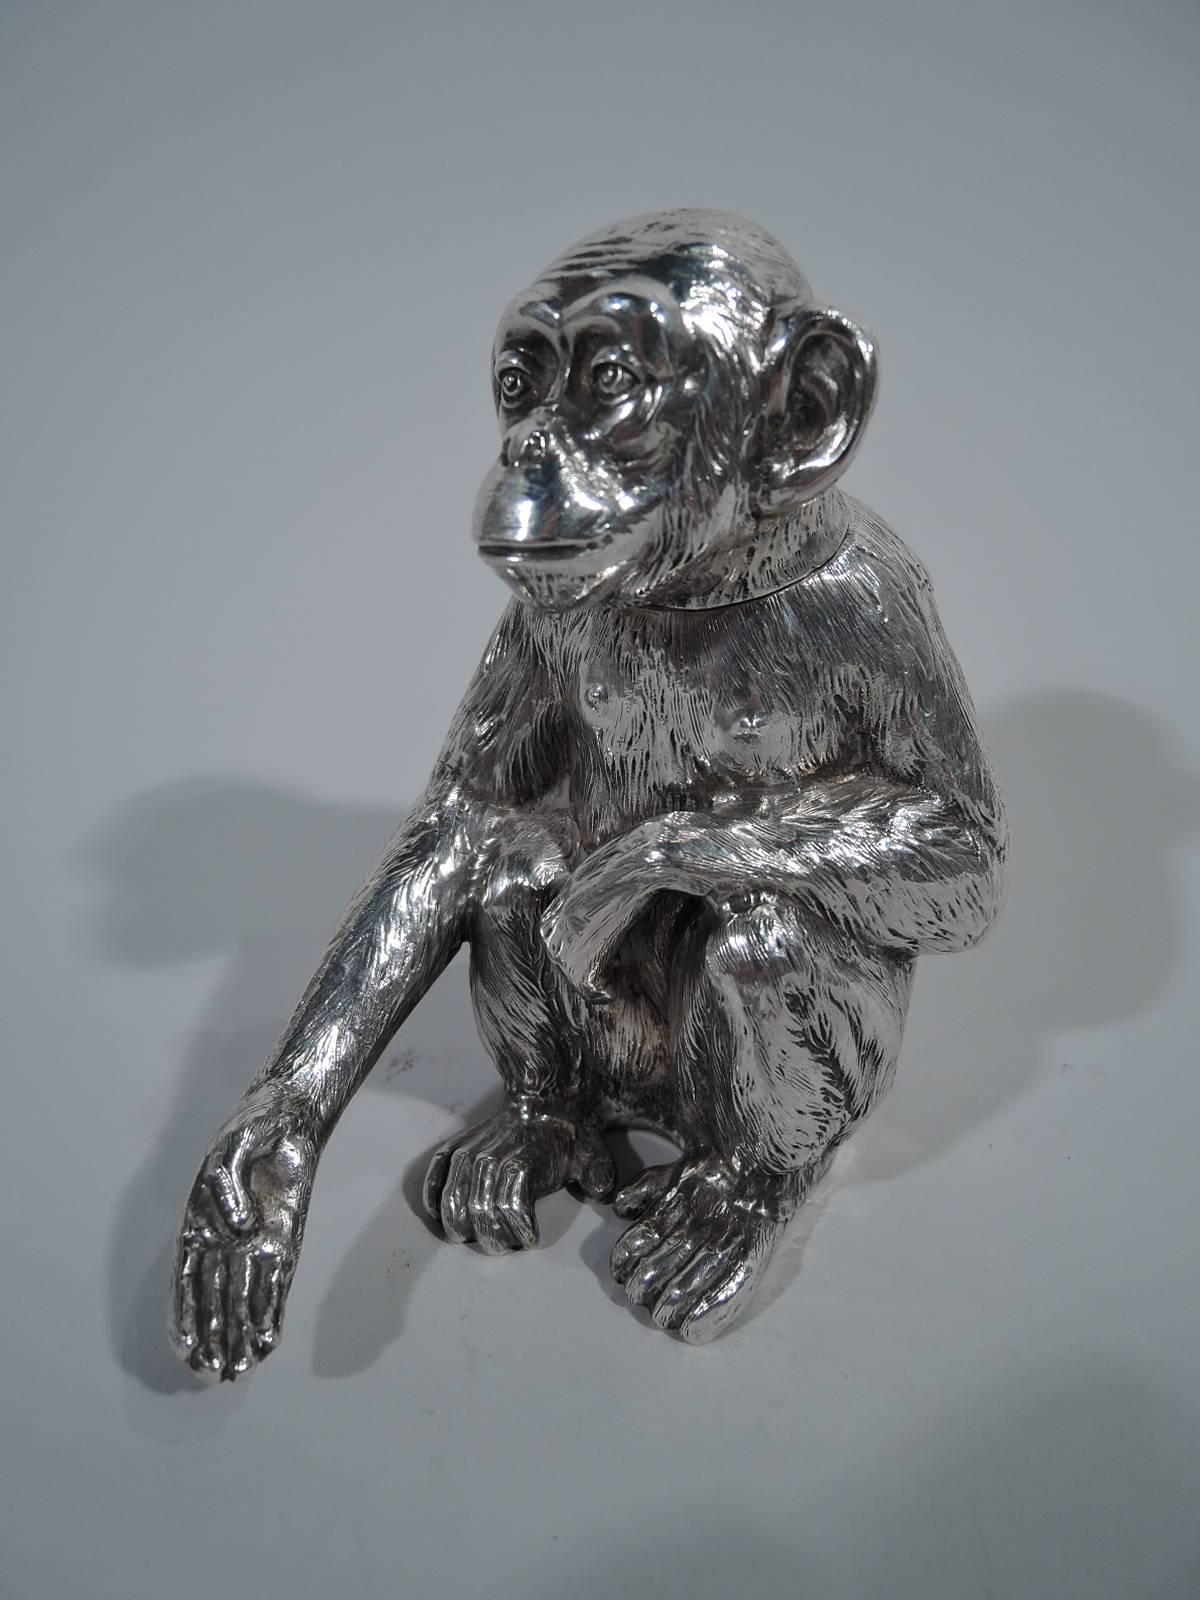 Antique German 800 silver figural box, circa 1910. A crouched chimp extends a paw (hand?) in greeting. Realistic fur, tensile hind feet, and funny oversized ears. A desirable desk companion for philosophical reflections – serious monkey business.